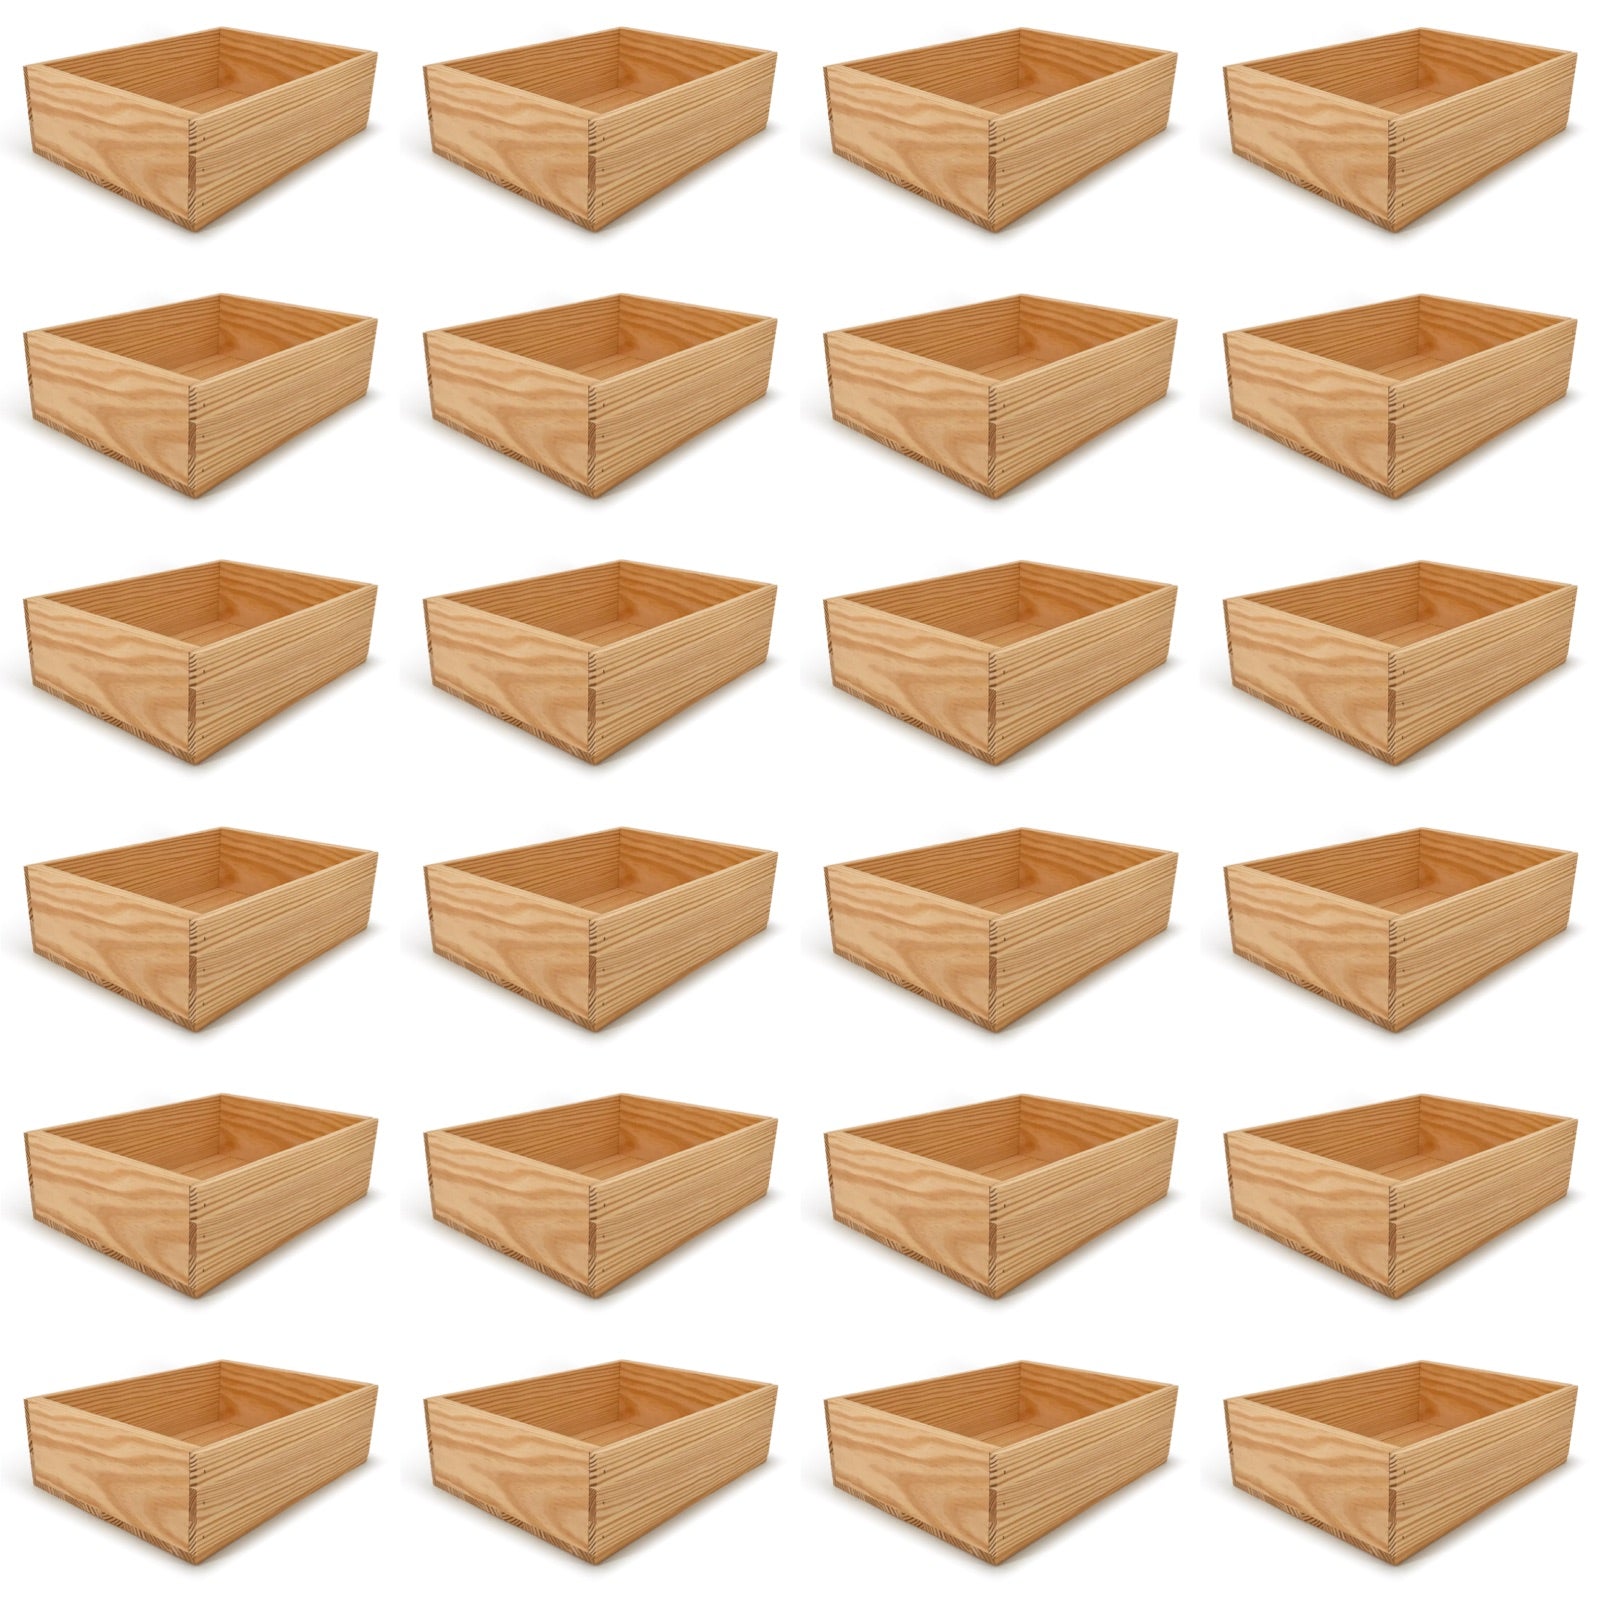 24 Small wooden crates 14x10x4.25